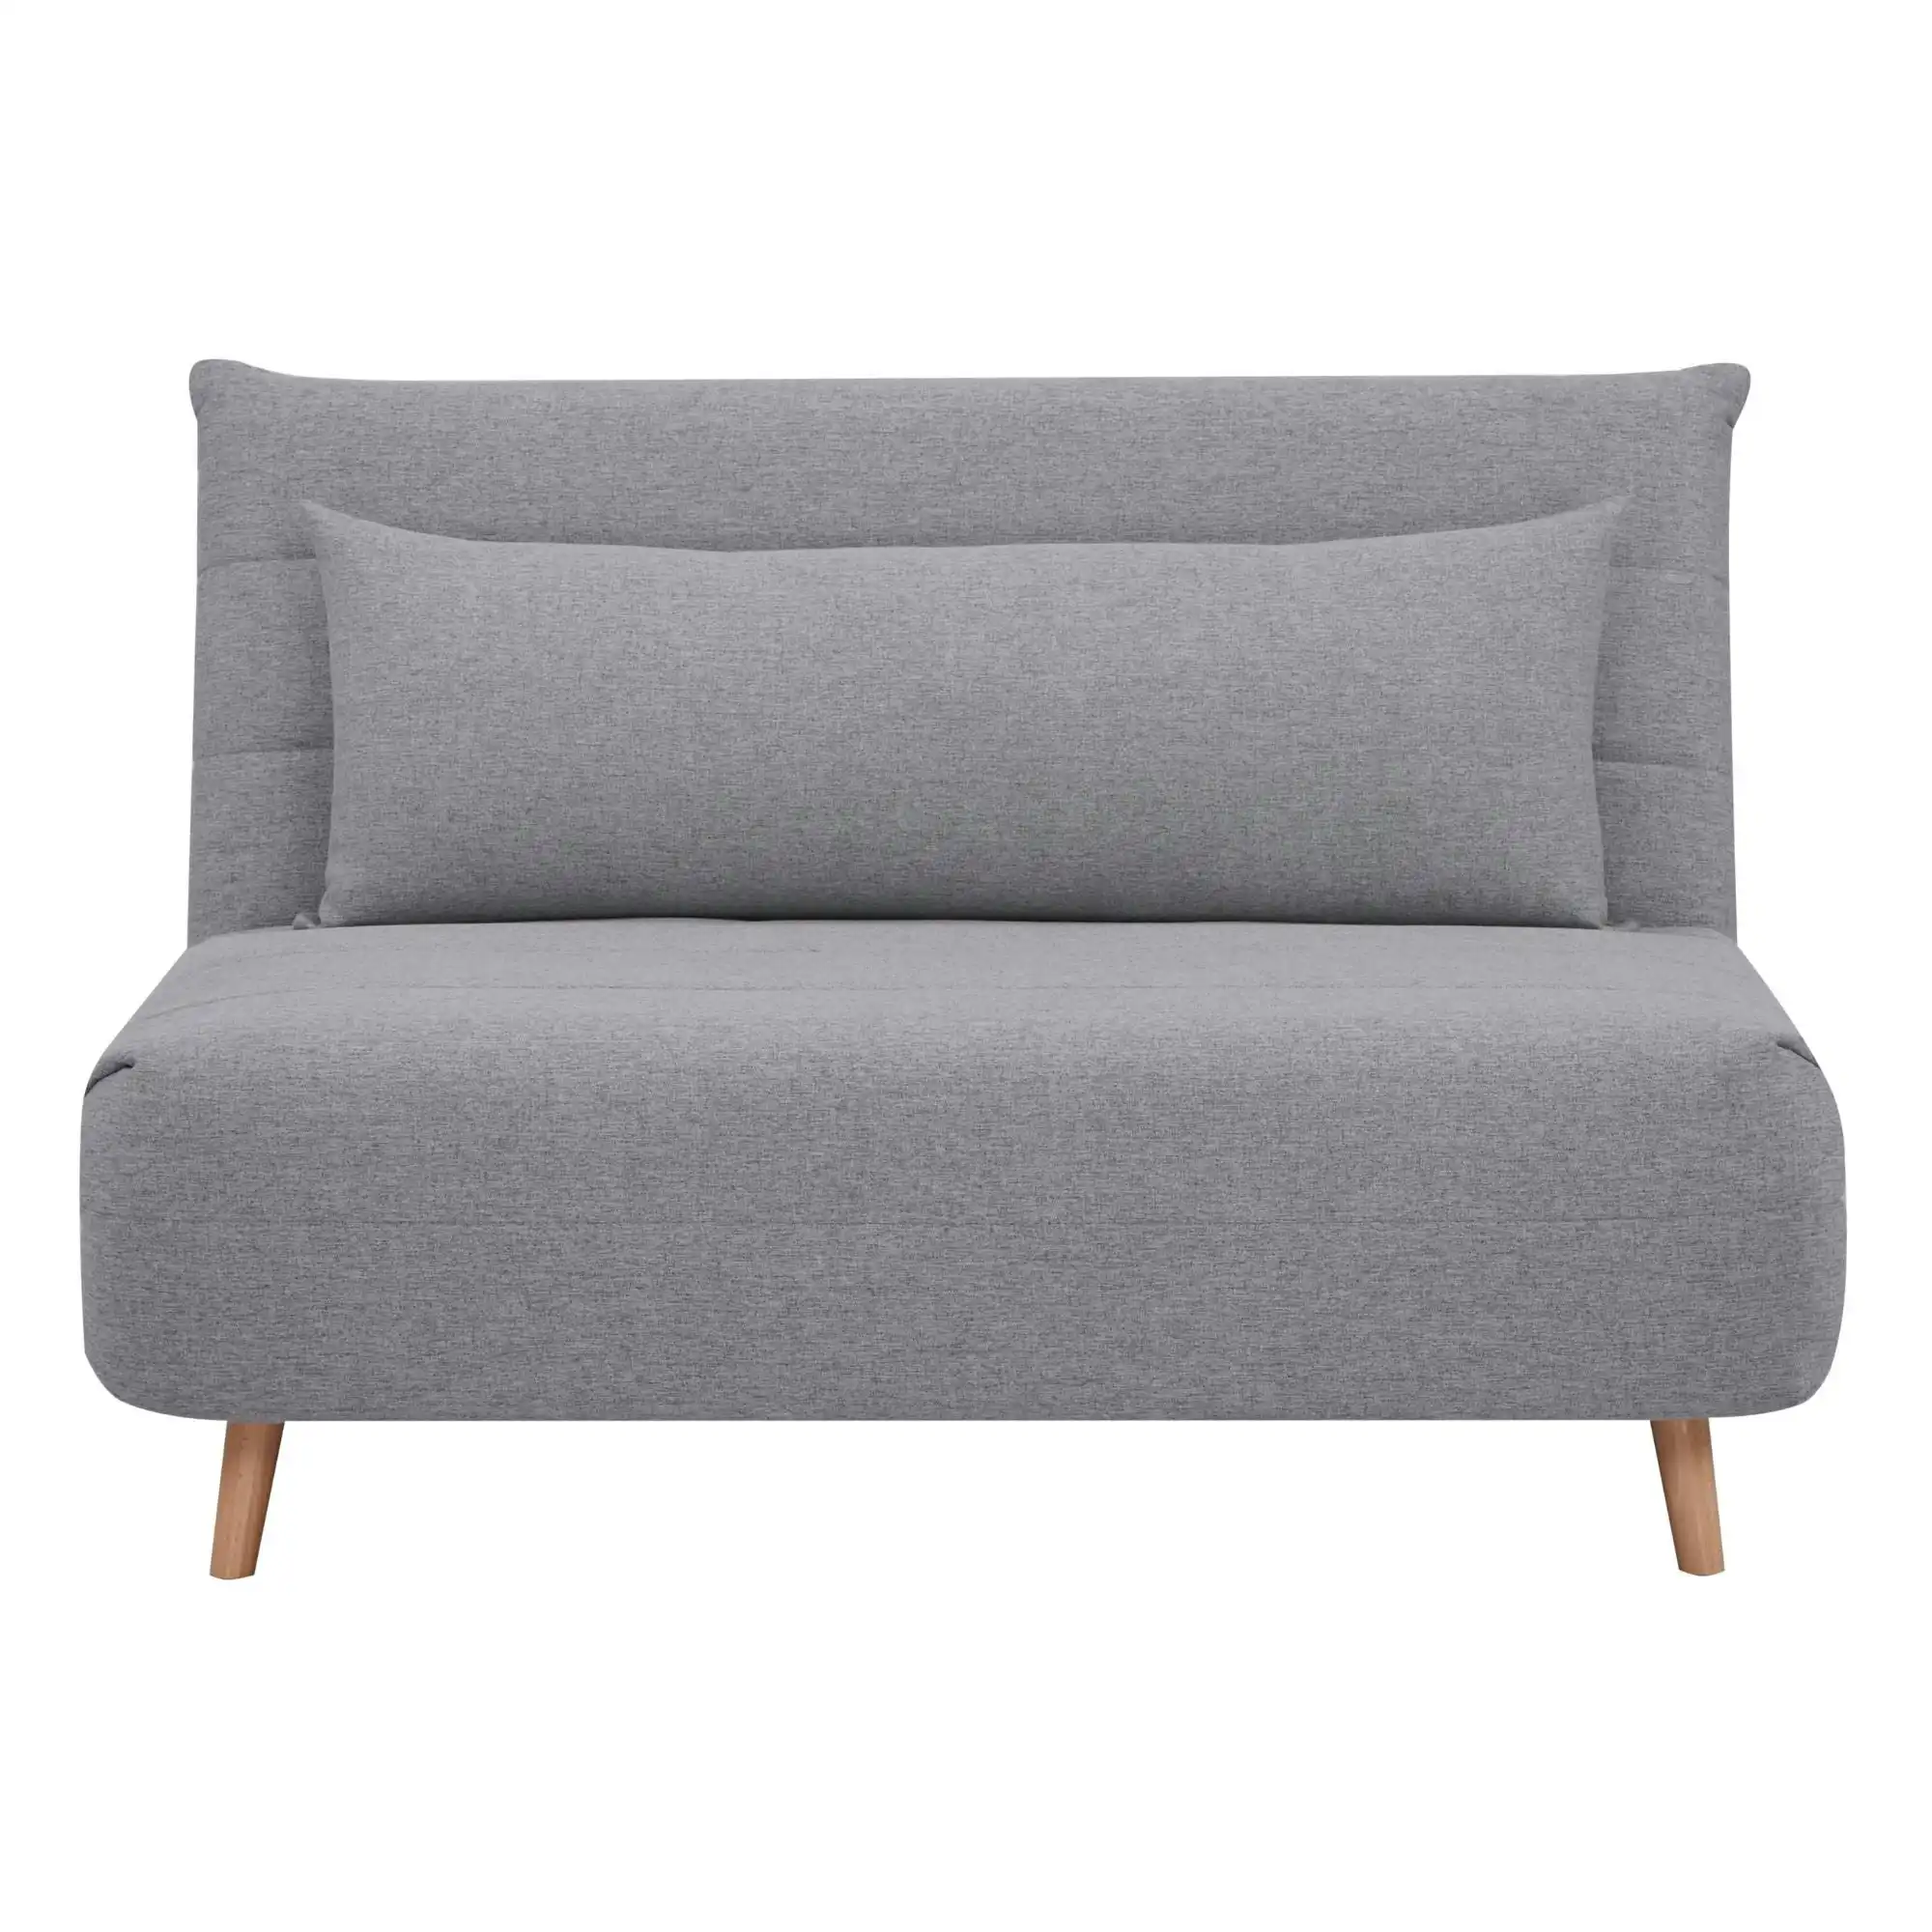 Audrey 2 Seater Sofa Bed